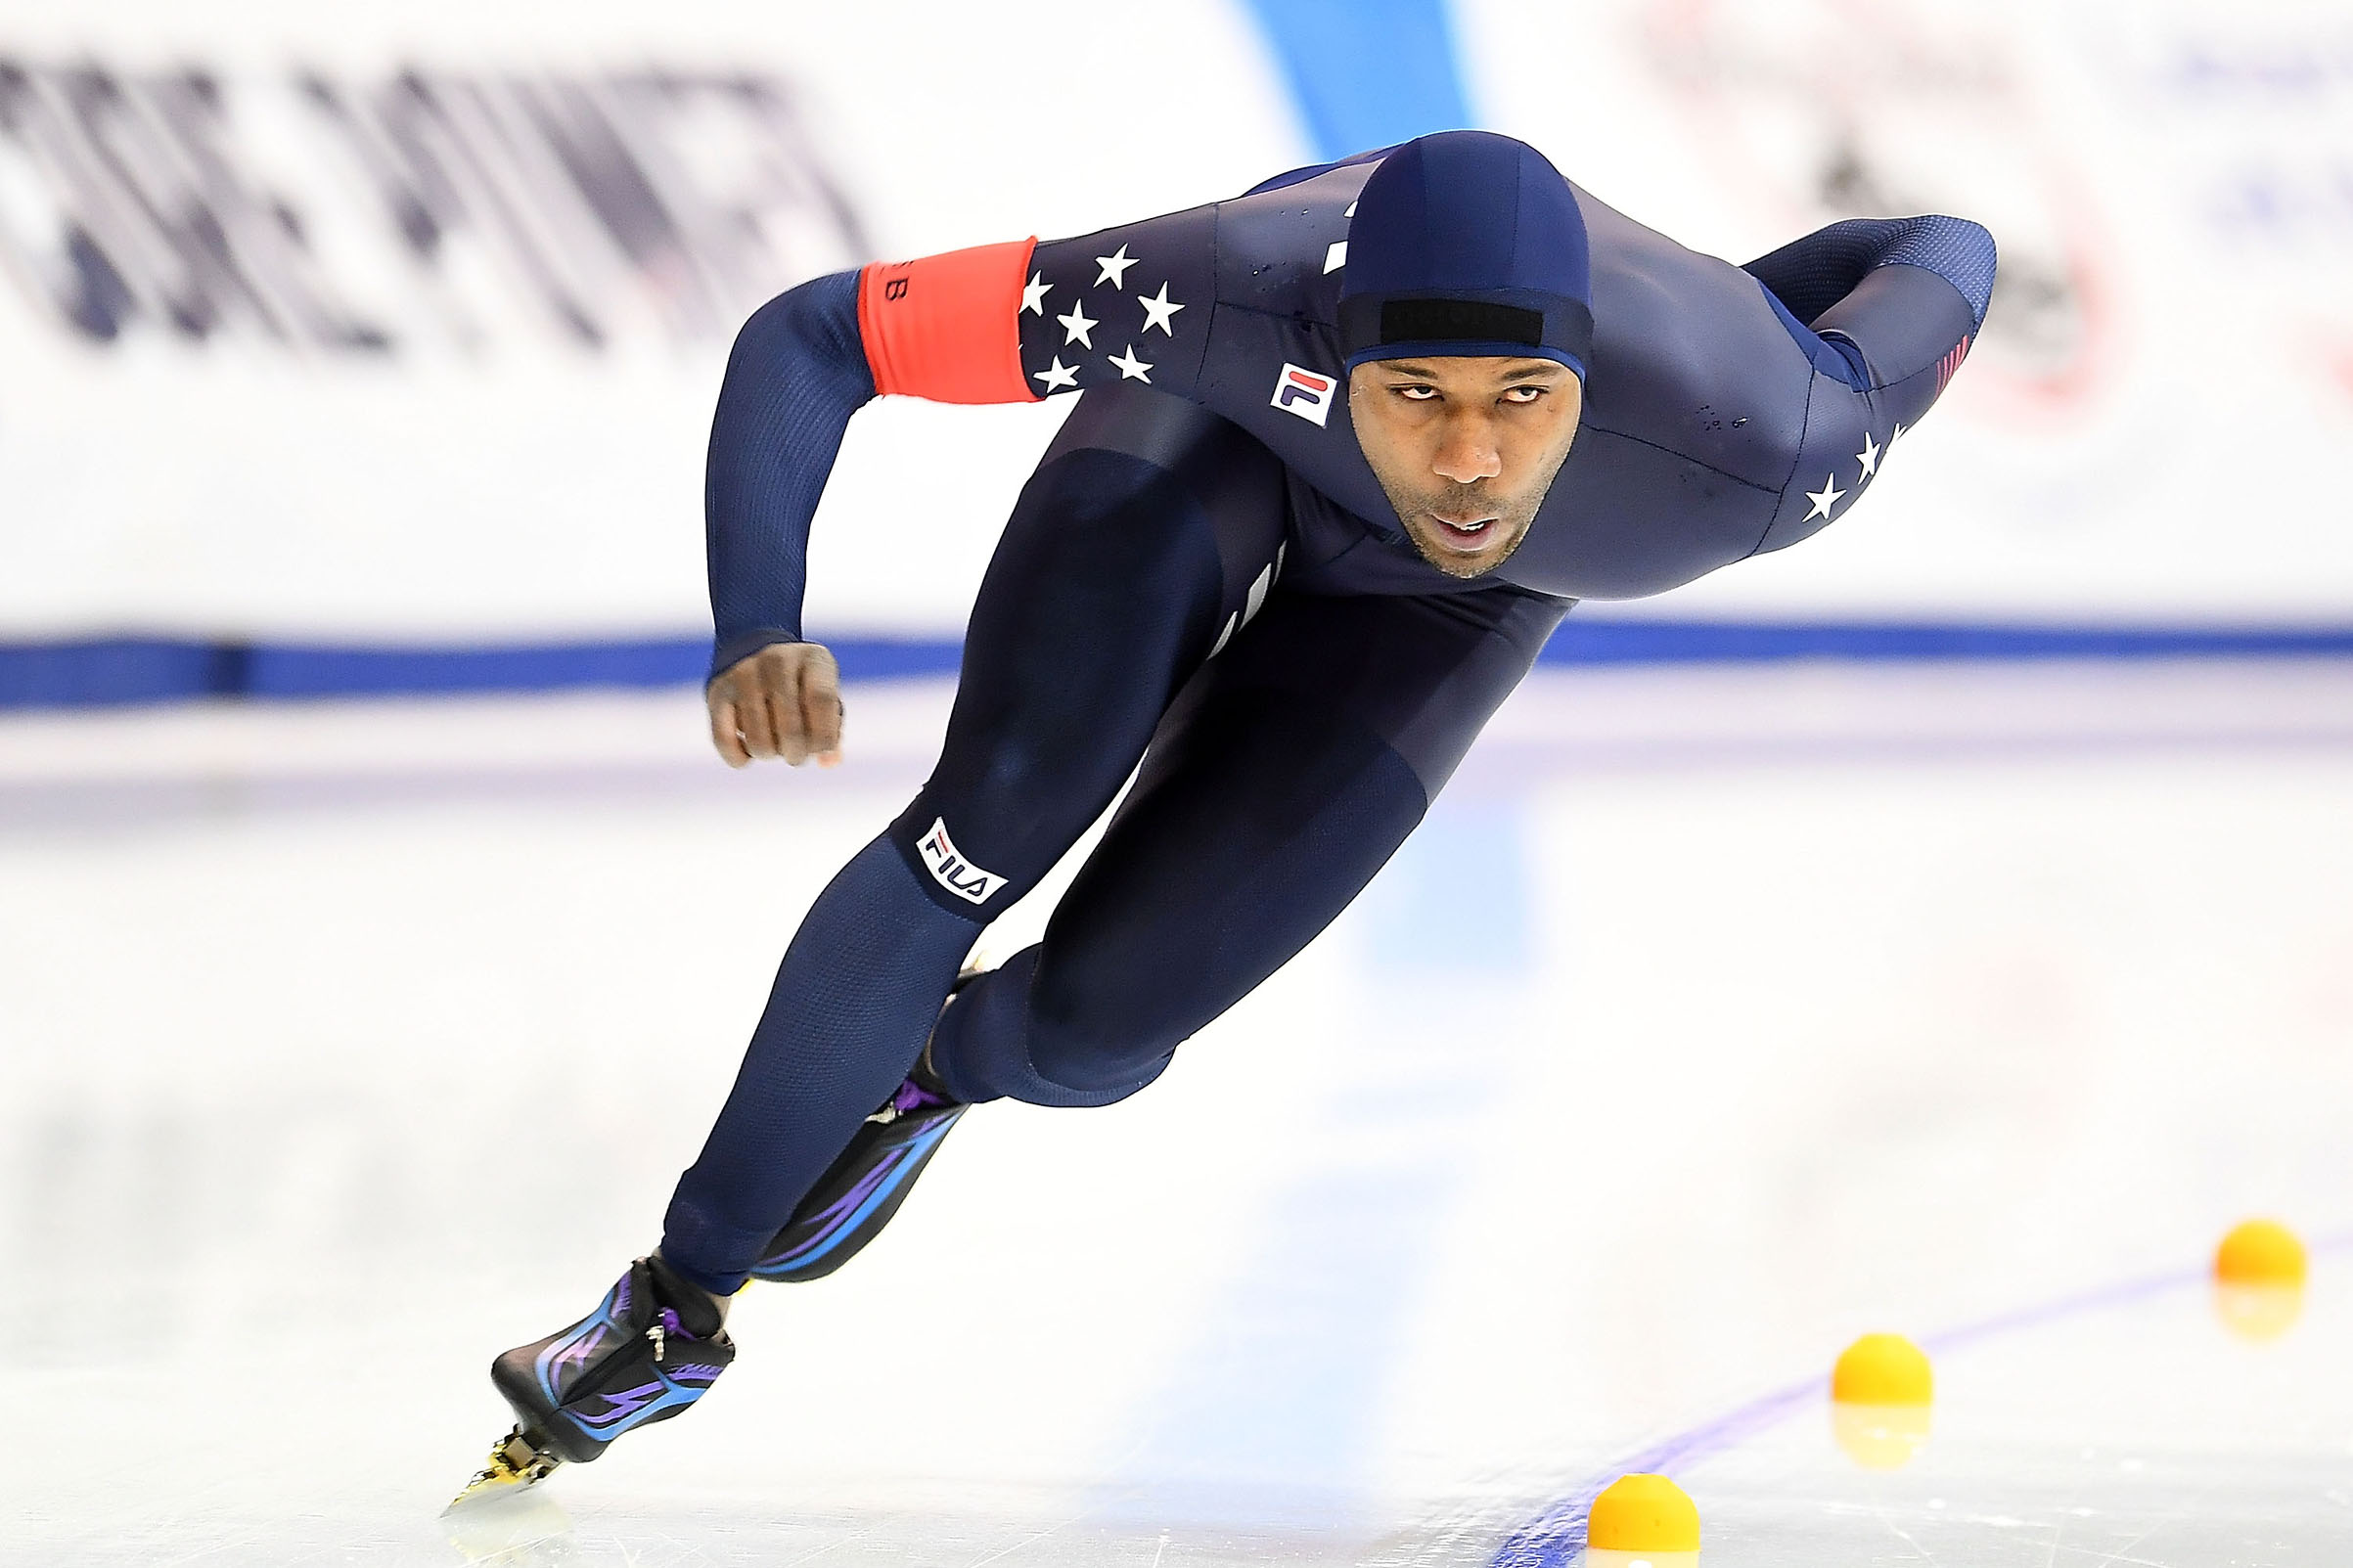 Shani Davis competes in the Men's 1500 meter event during the Long Track Speed Skating Olympic Trials at the Pettit National Ice Center in Milwaukee, on Jan. 6, 2018. (Stacy Revere—Getty Images)